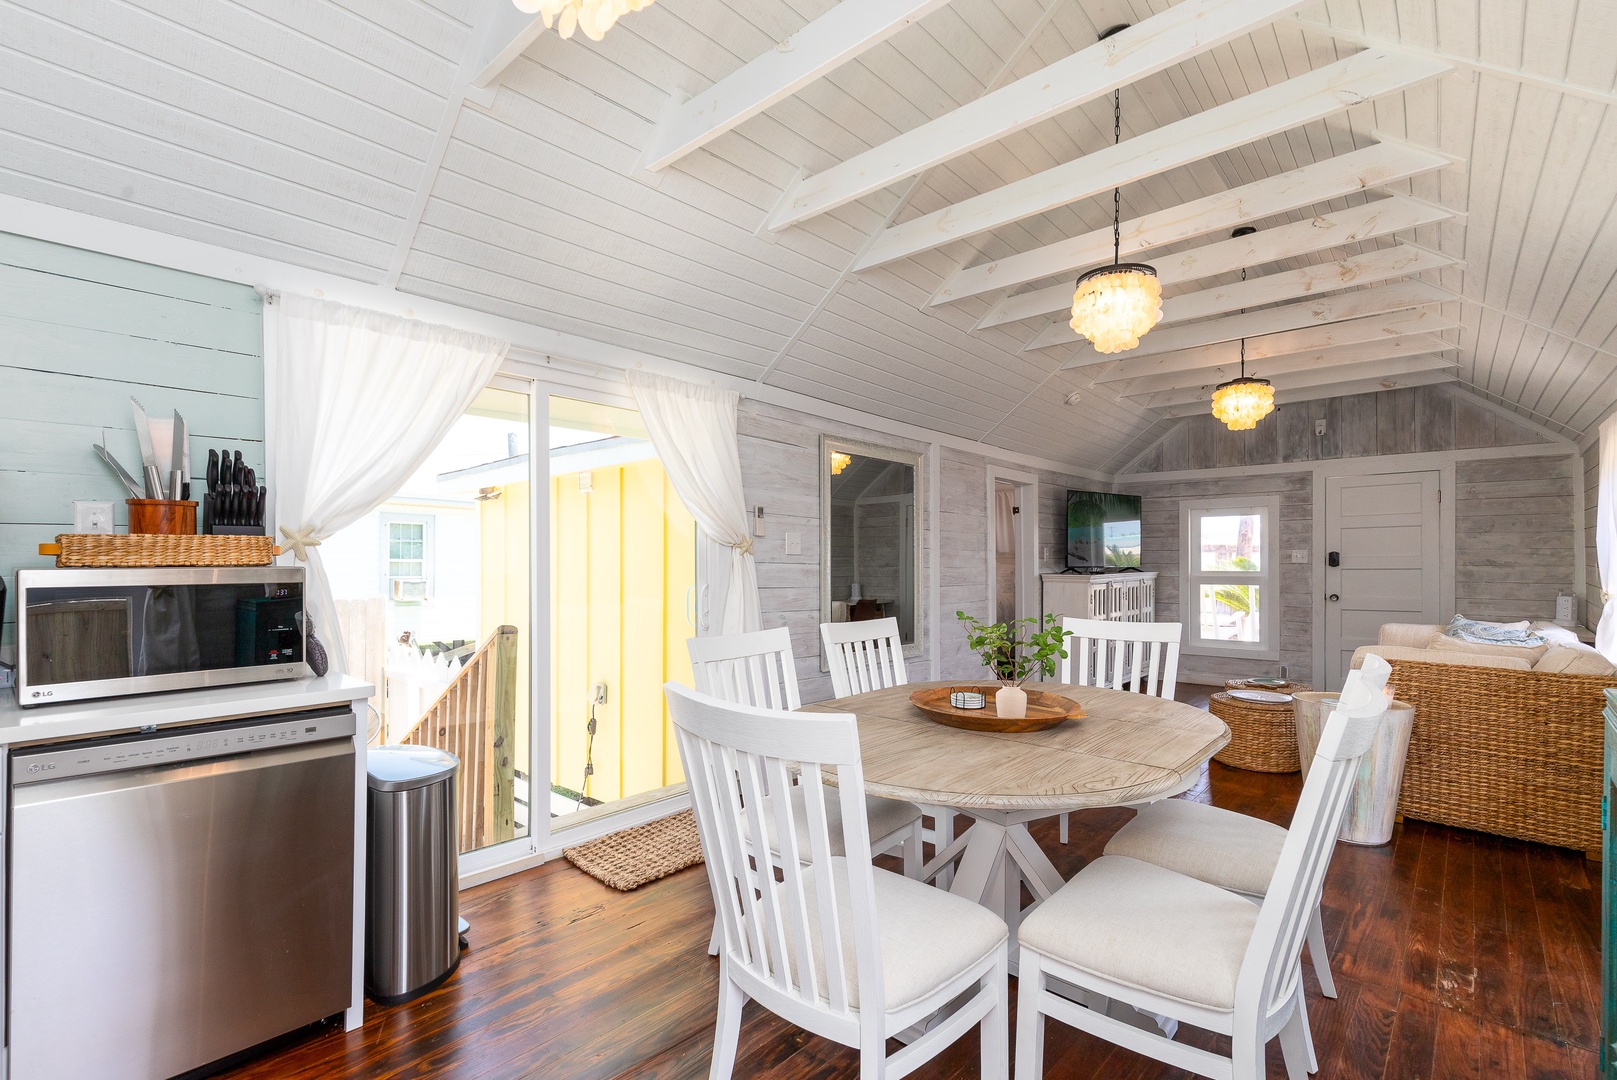 The delightful coastal kitchen is well-equipped for your visit to Port Aransas